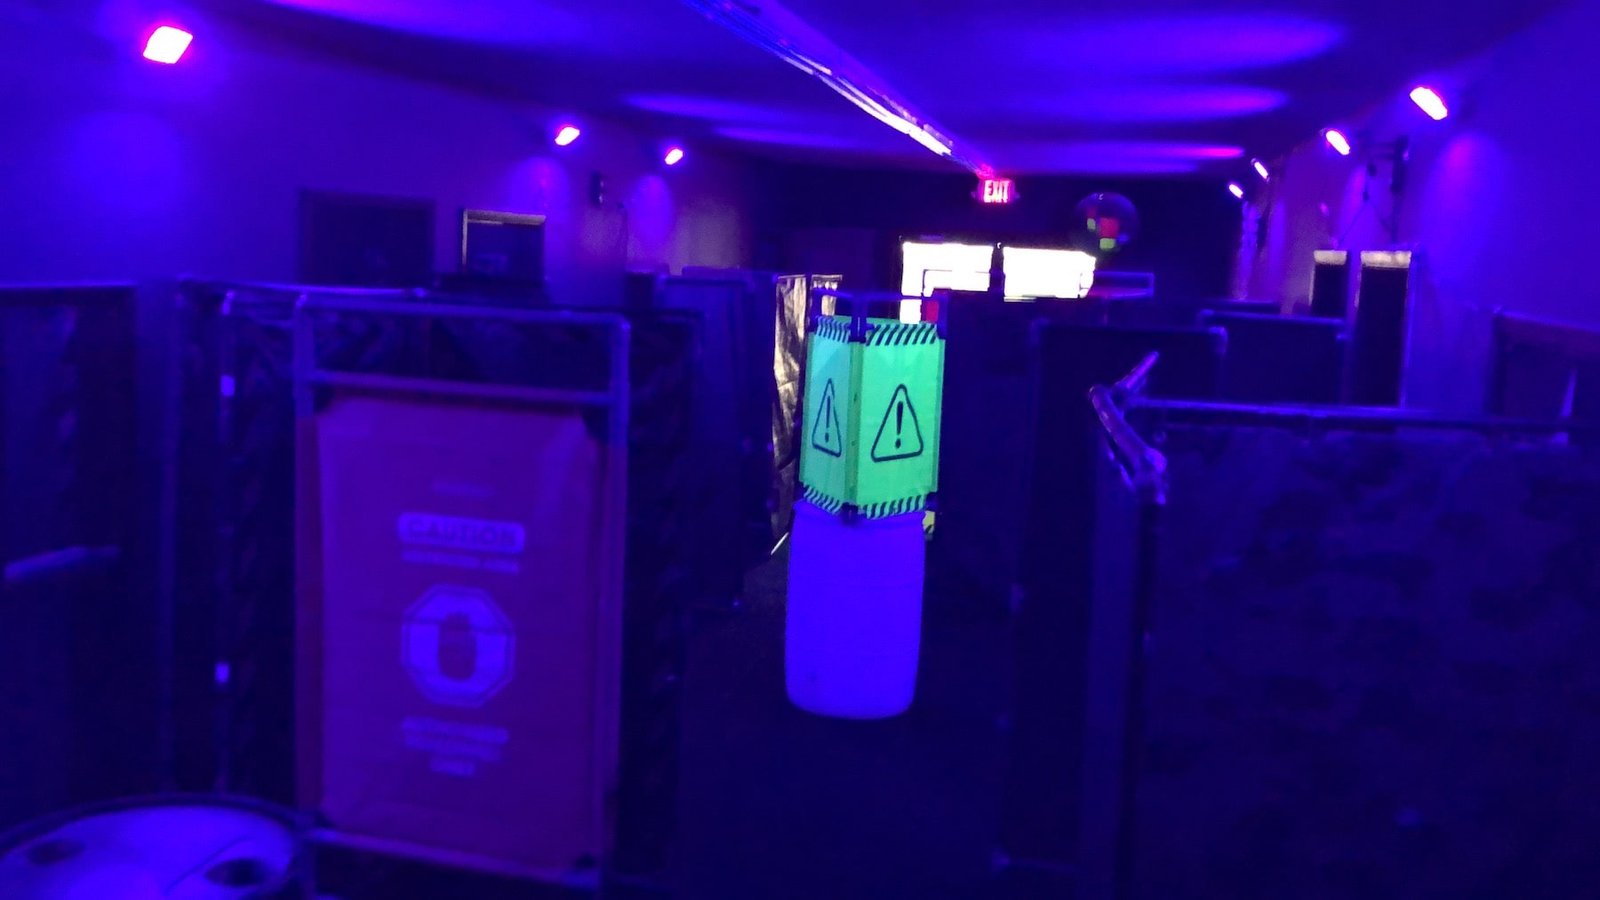 Laser Tag Arena Glow at BMAZ the adventure zone in Black Mountain NC